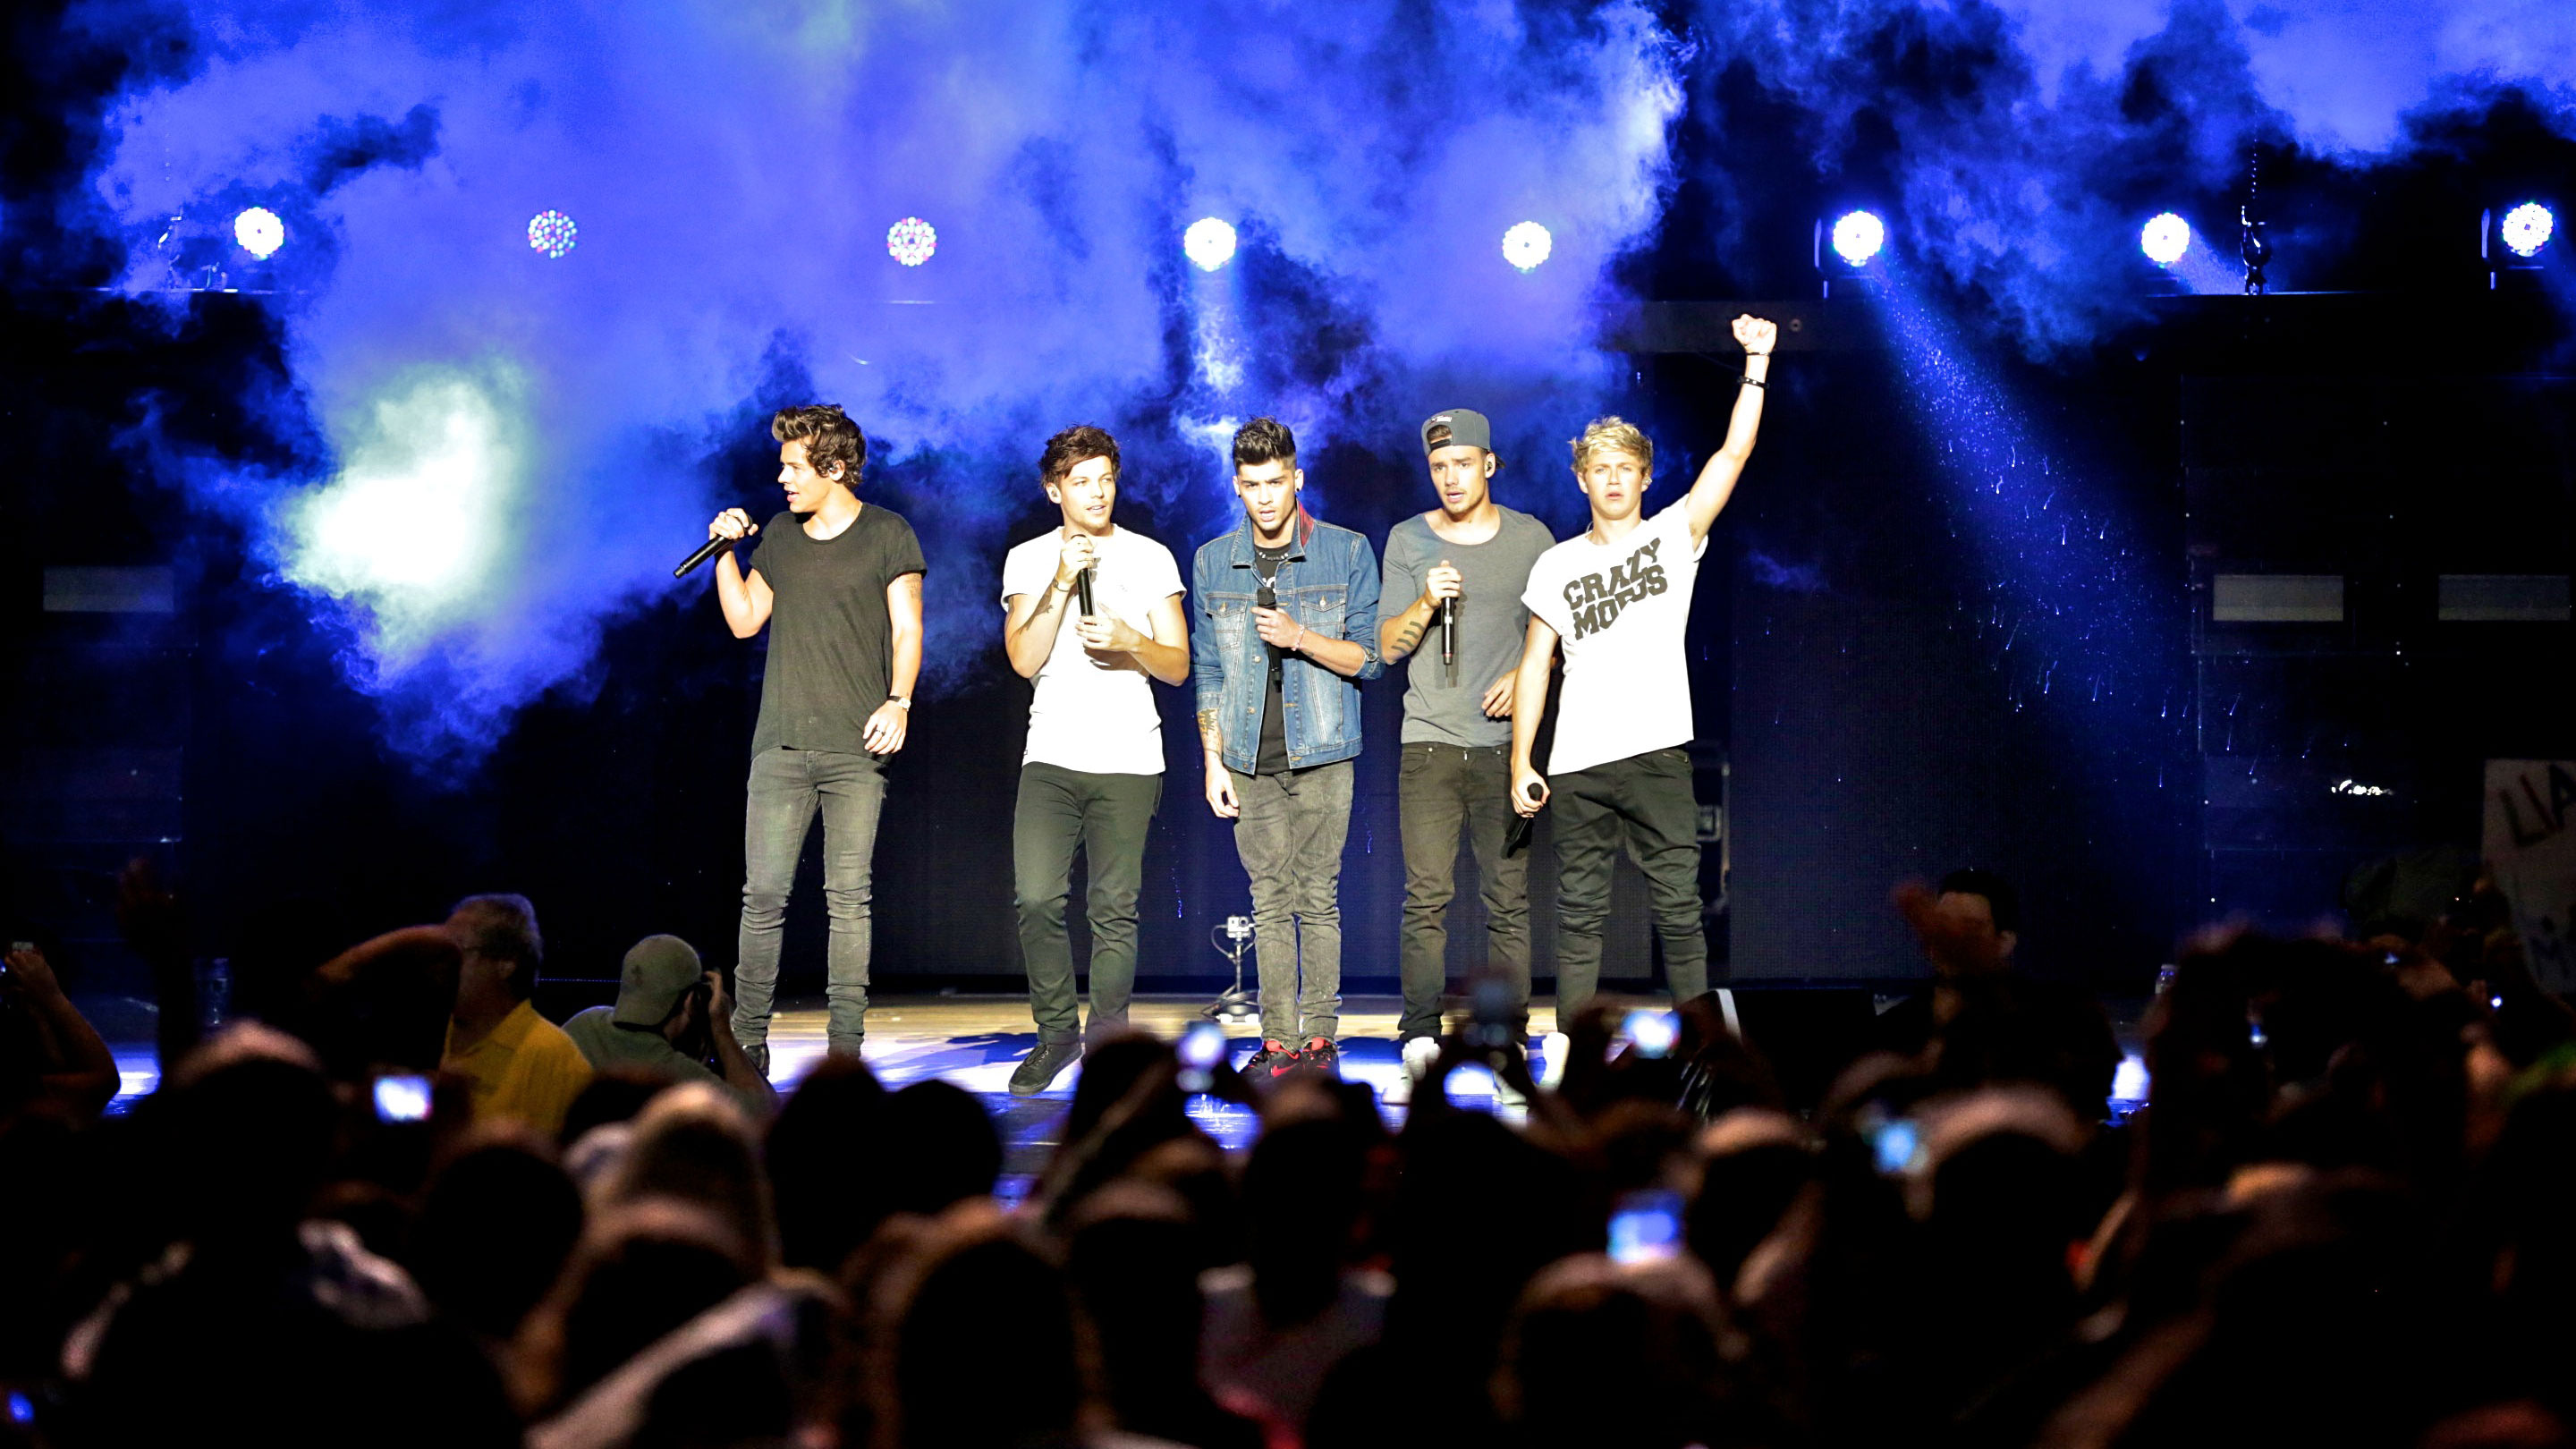 Concert: One direction, An English-Irish pop boy band formed in London‎, iTunes Festival: London 2012. 2880x1620 HD Background.